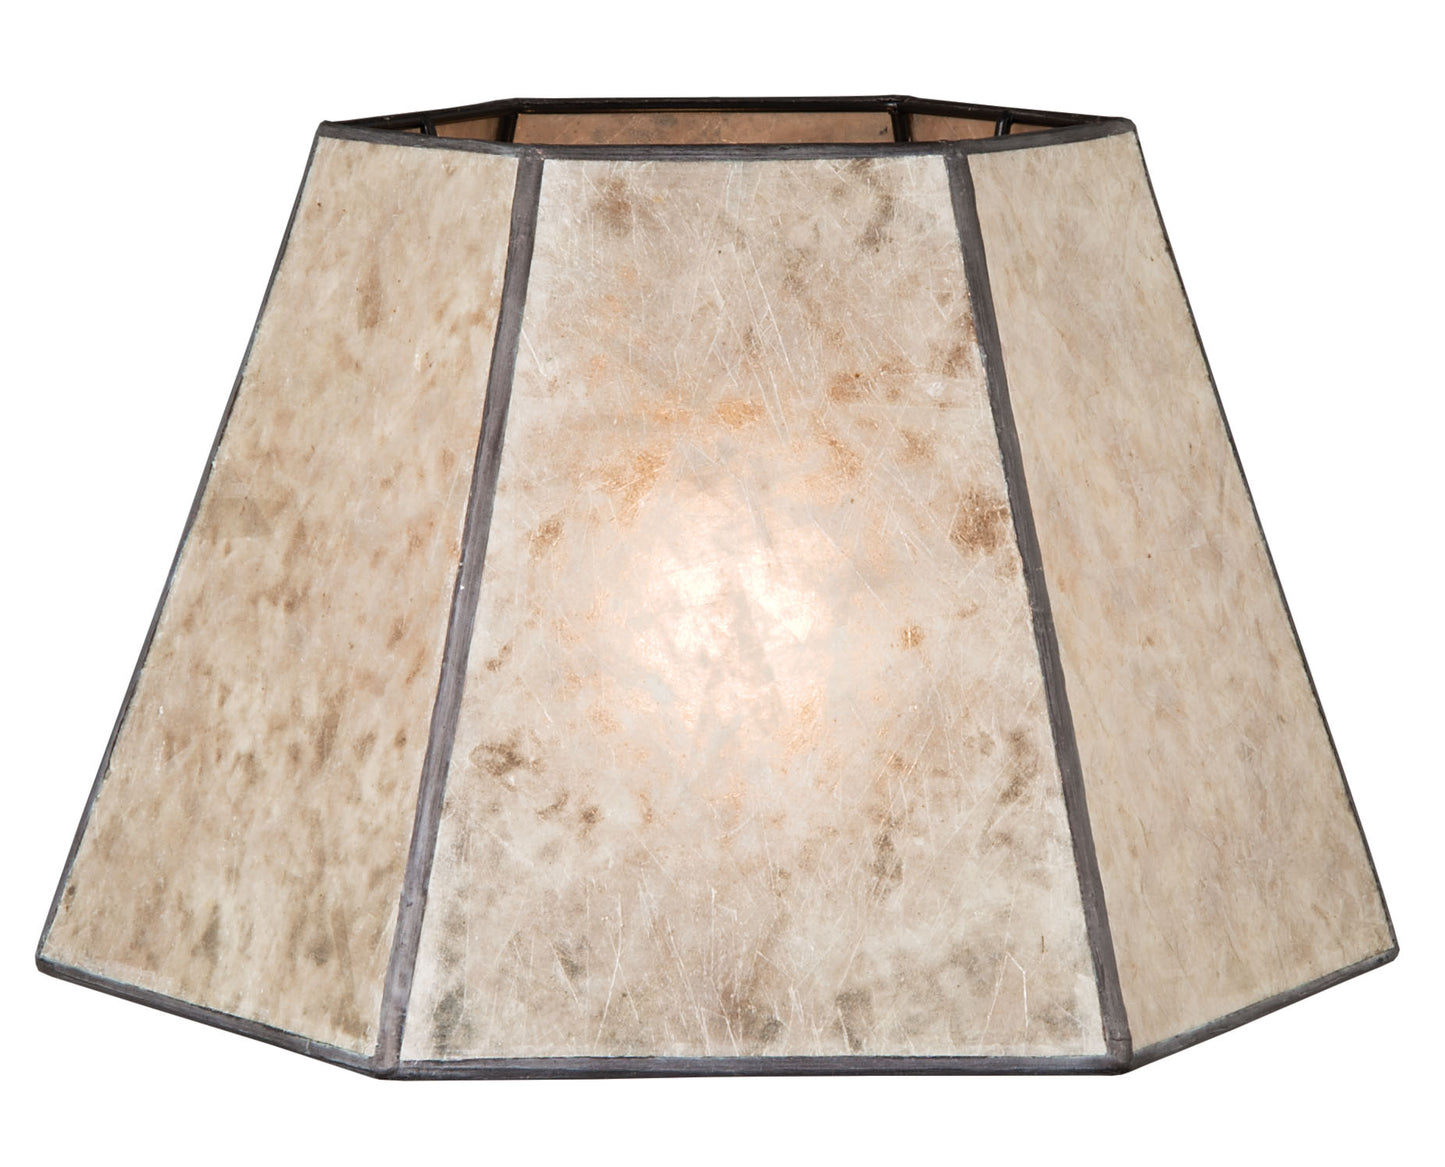 Parchment Color Hexagon Style Mica Lampshade